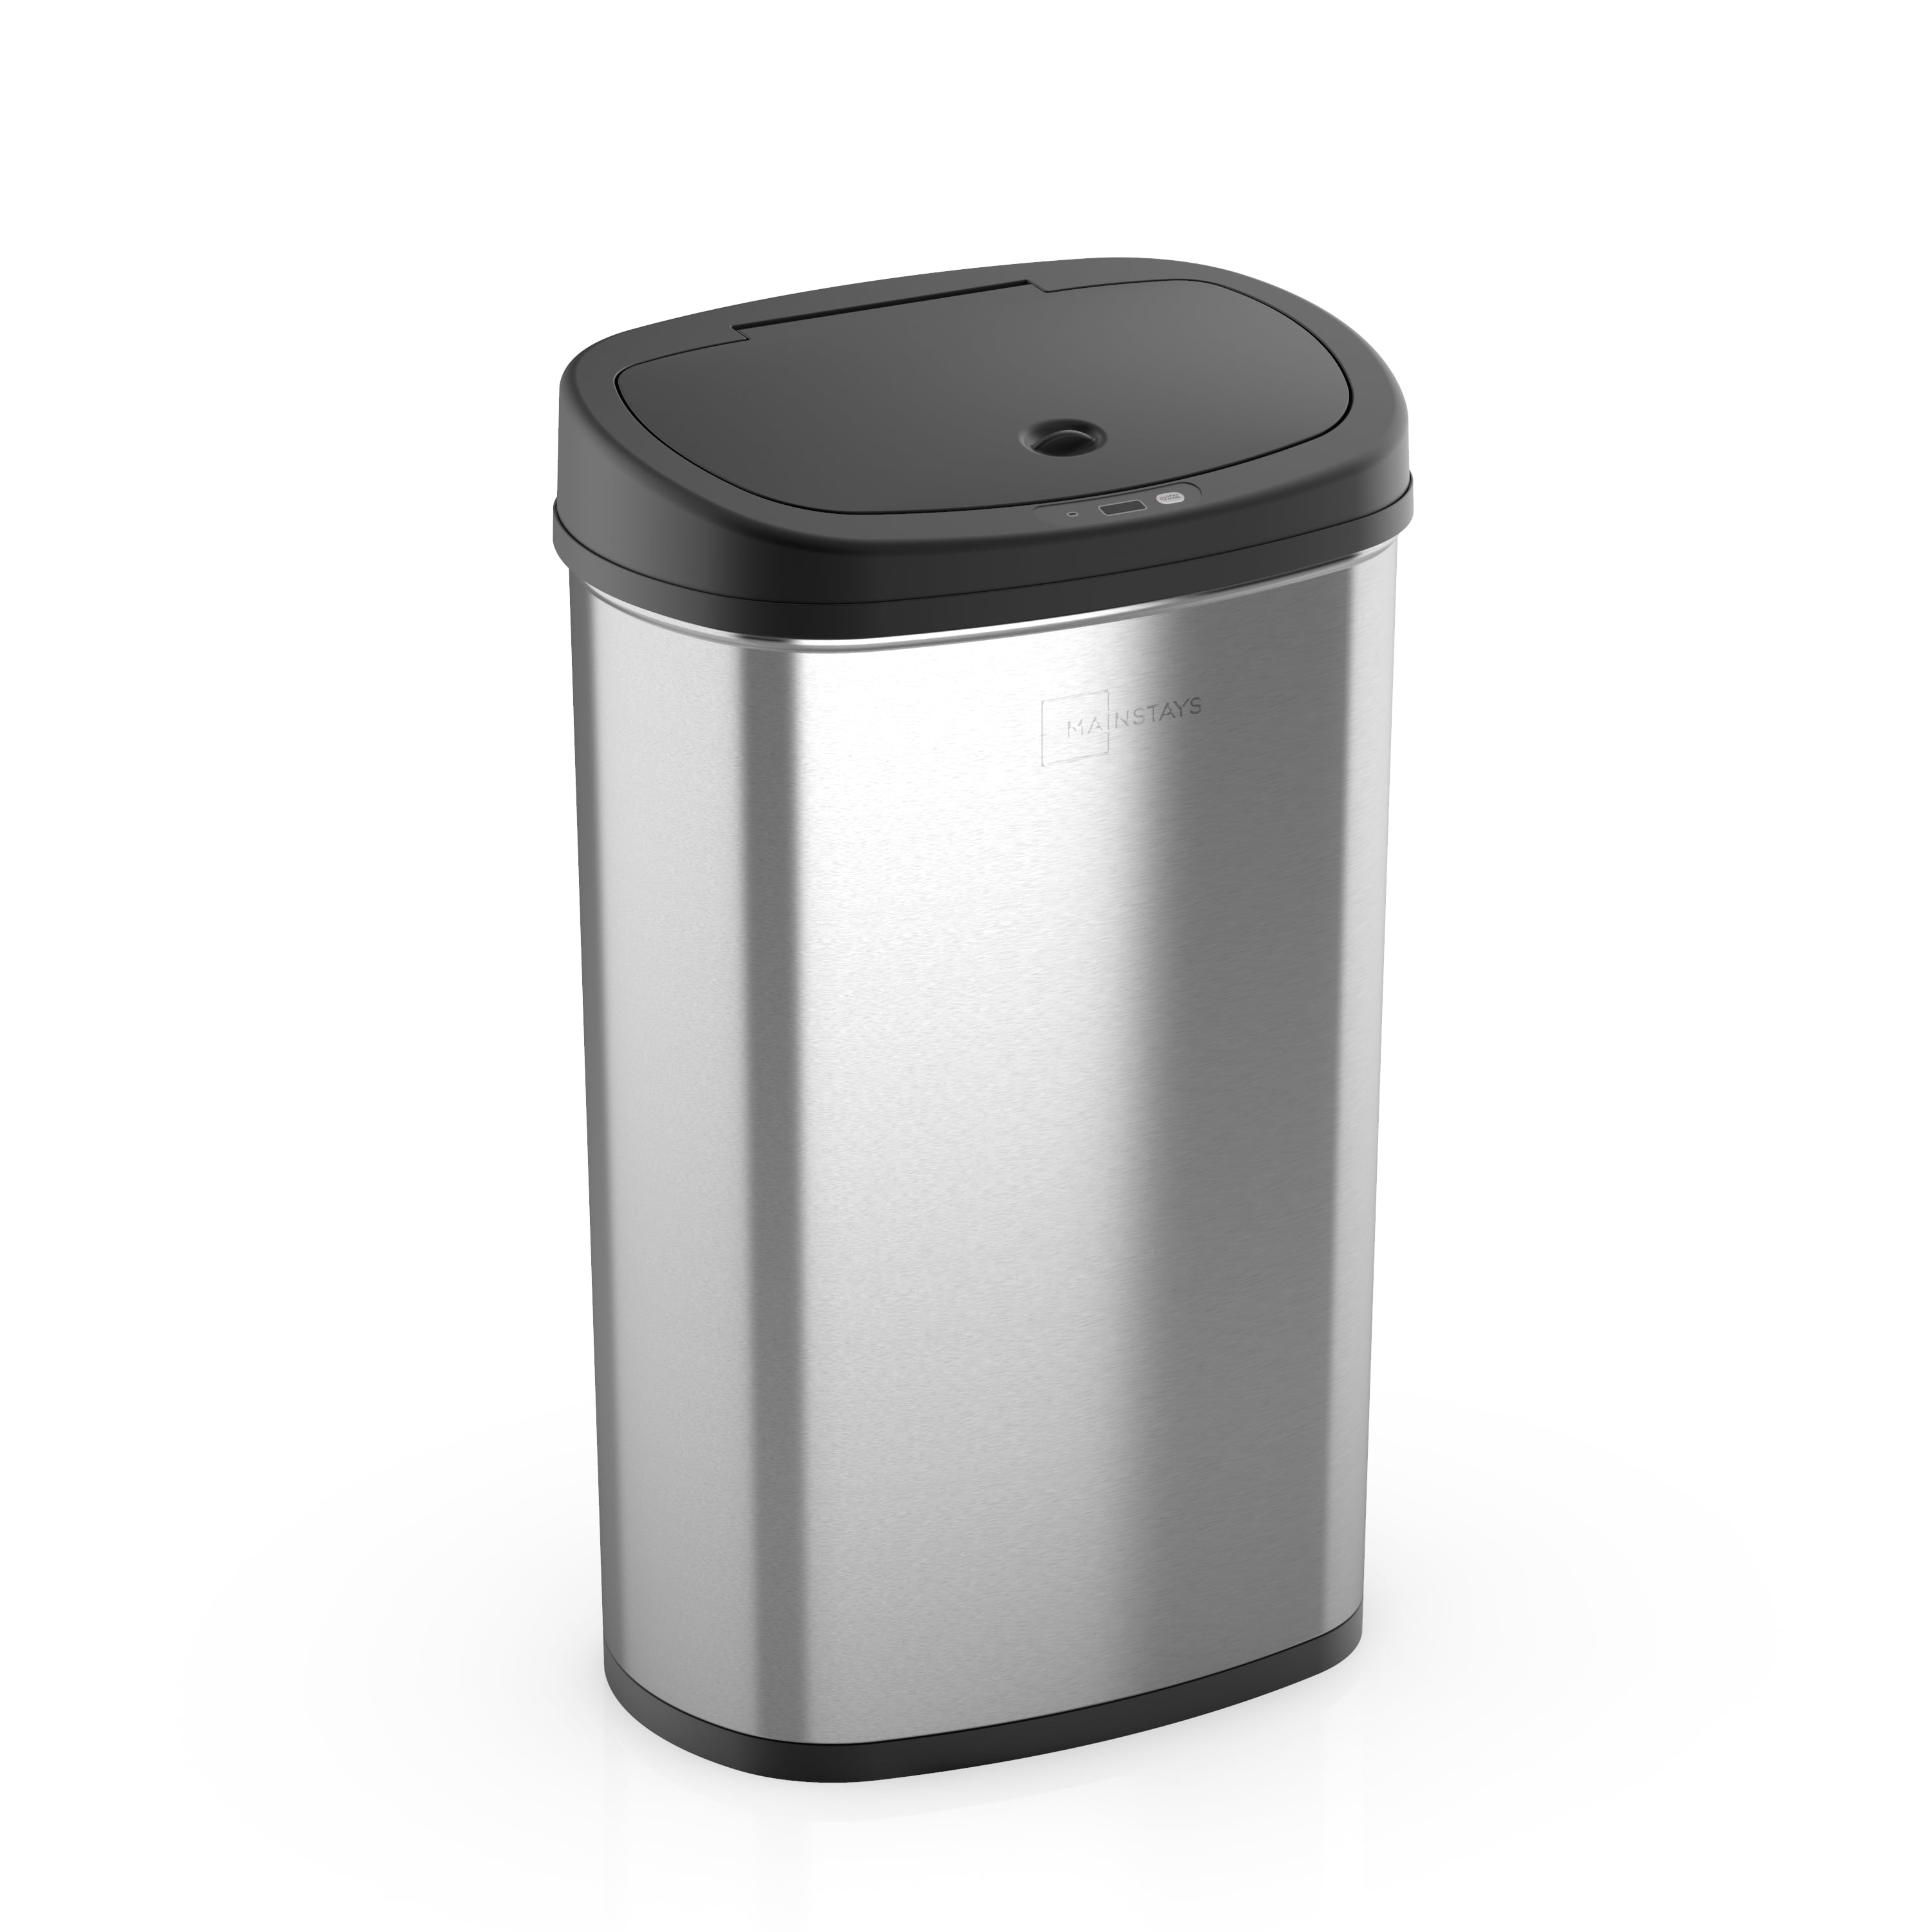 Trash Can Motion Sensor Garbage Touchless Bin Automatic Stainless Steel 13.2 Gal 